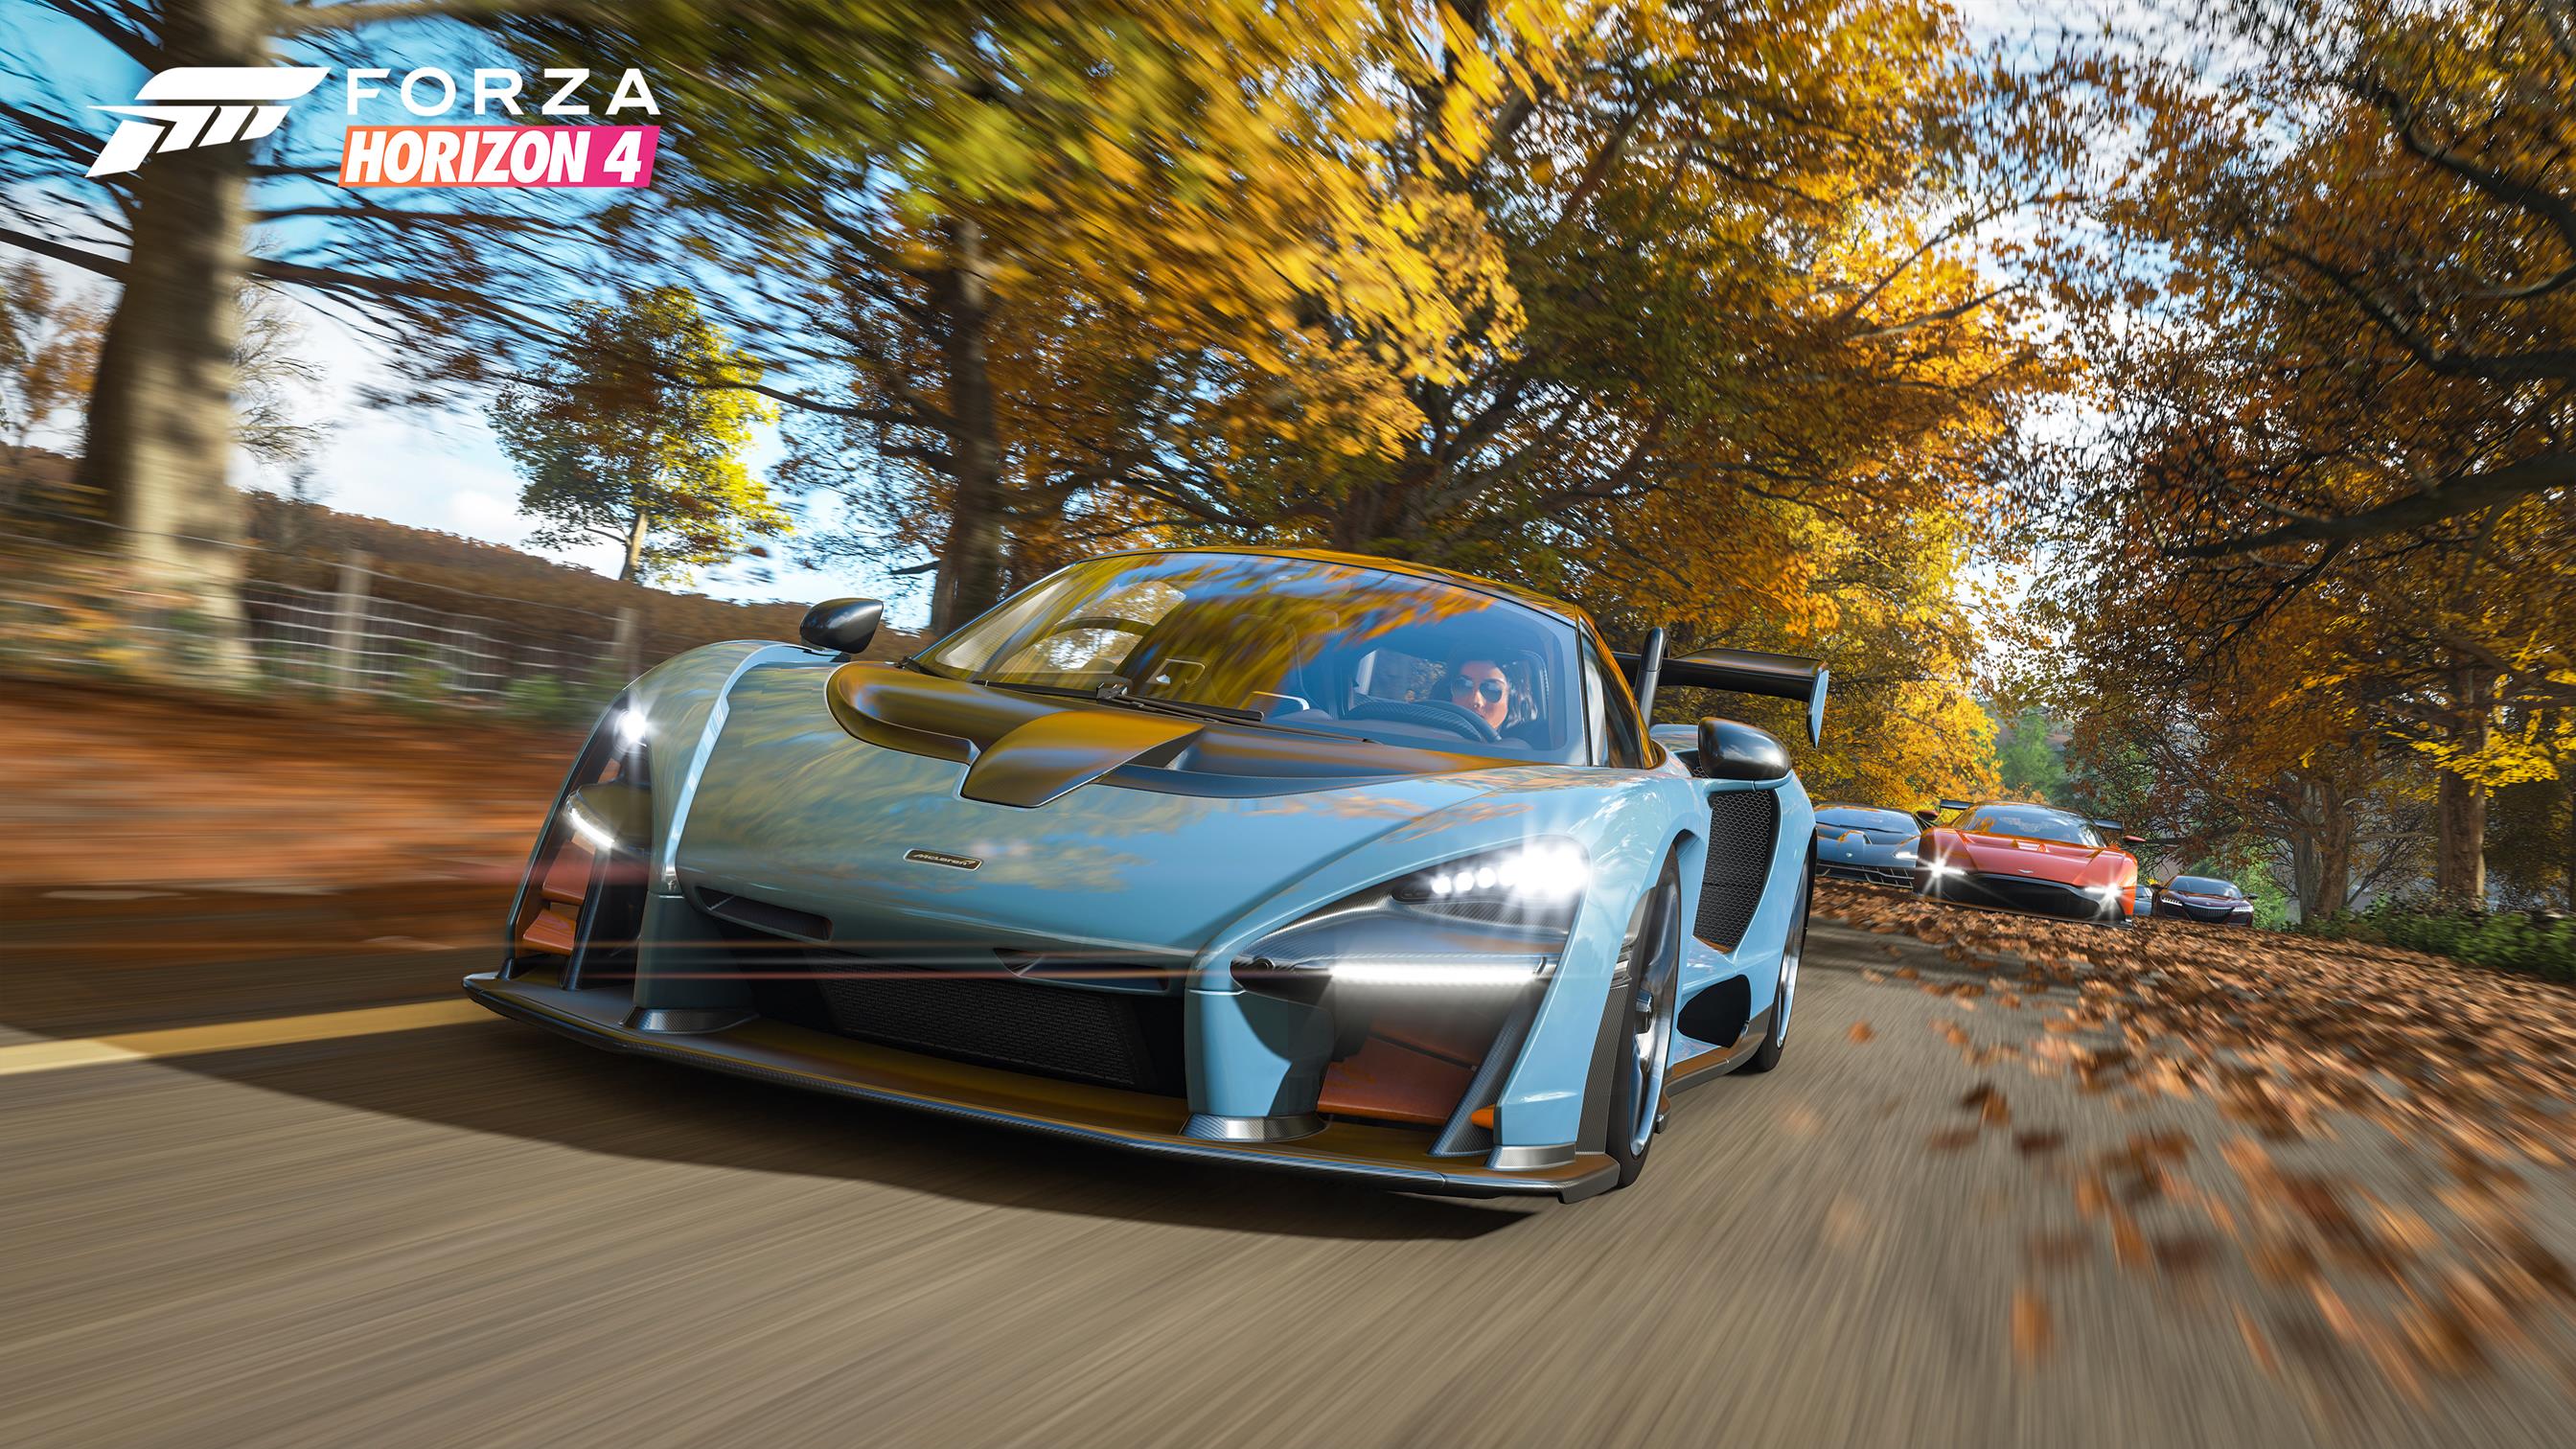 Image for Forza Horizon 4 contains 55 achievements for 1,000 Gamerscore